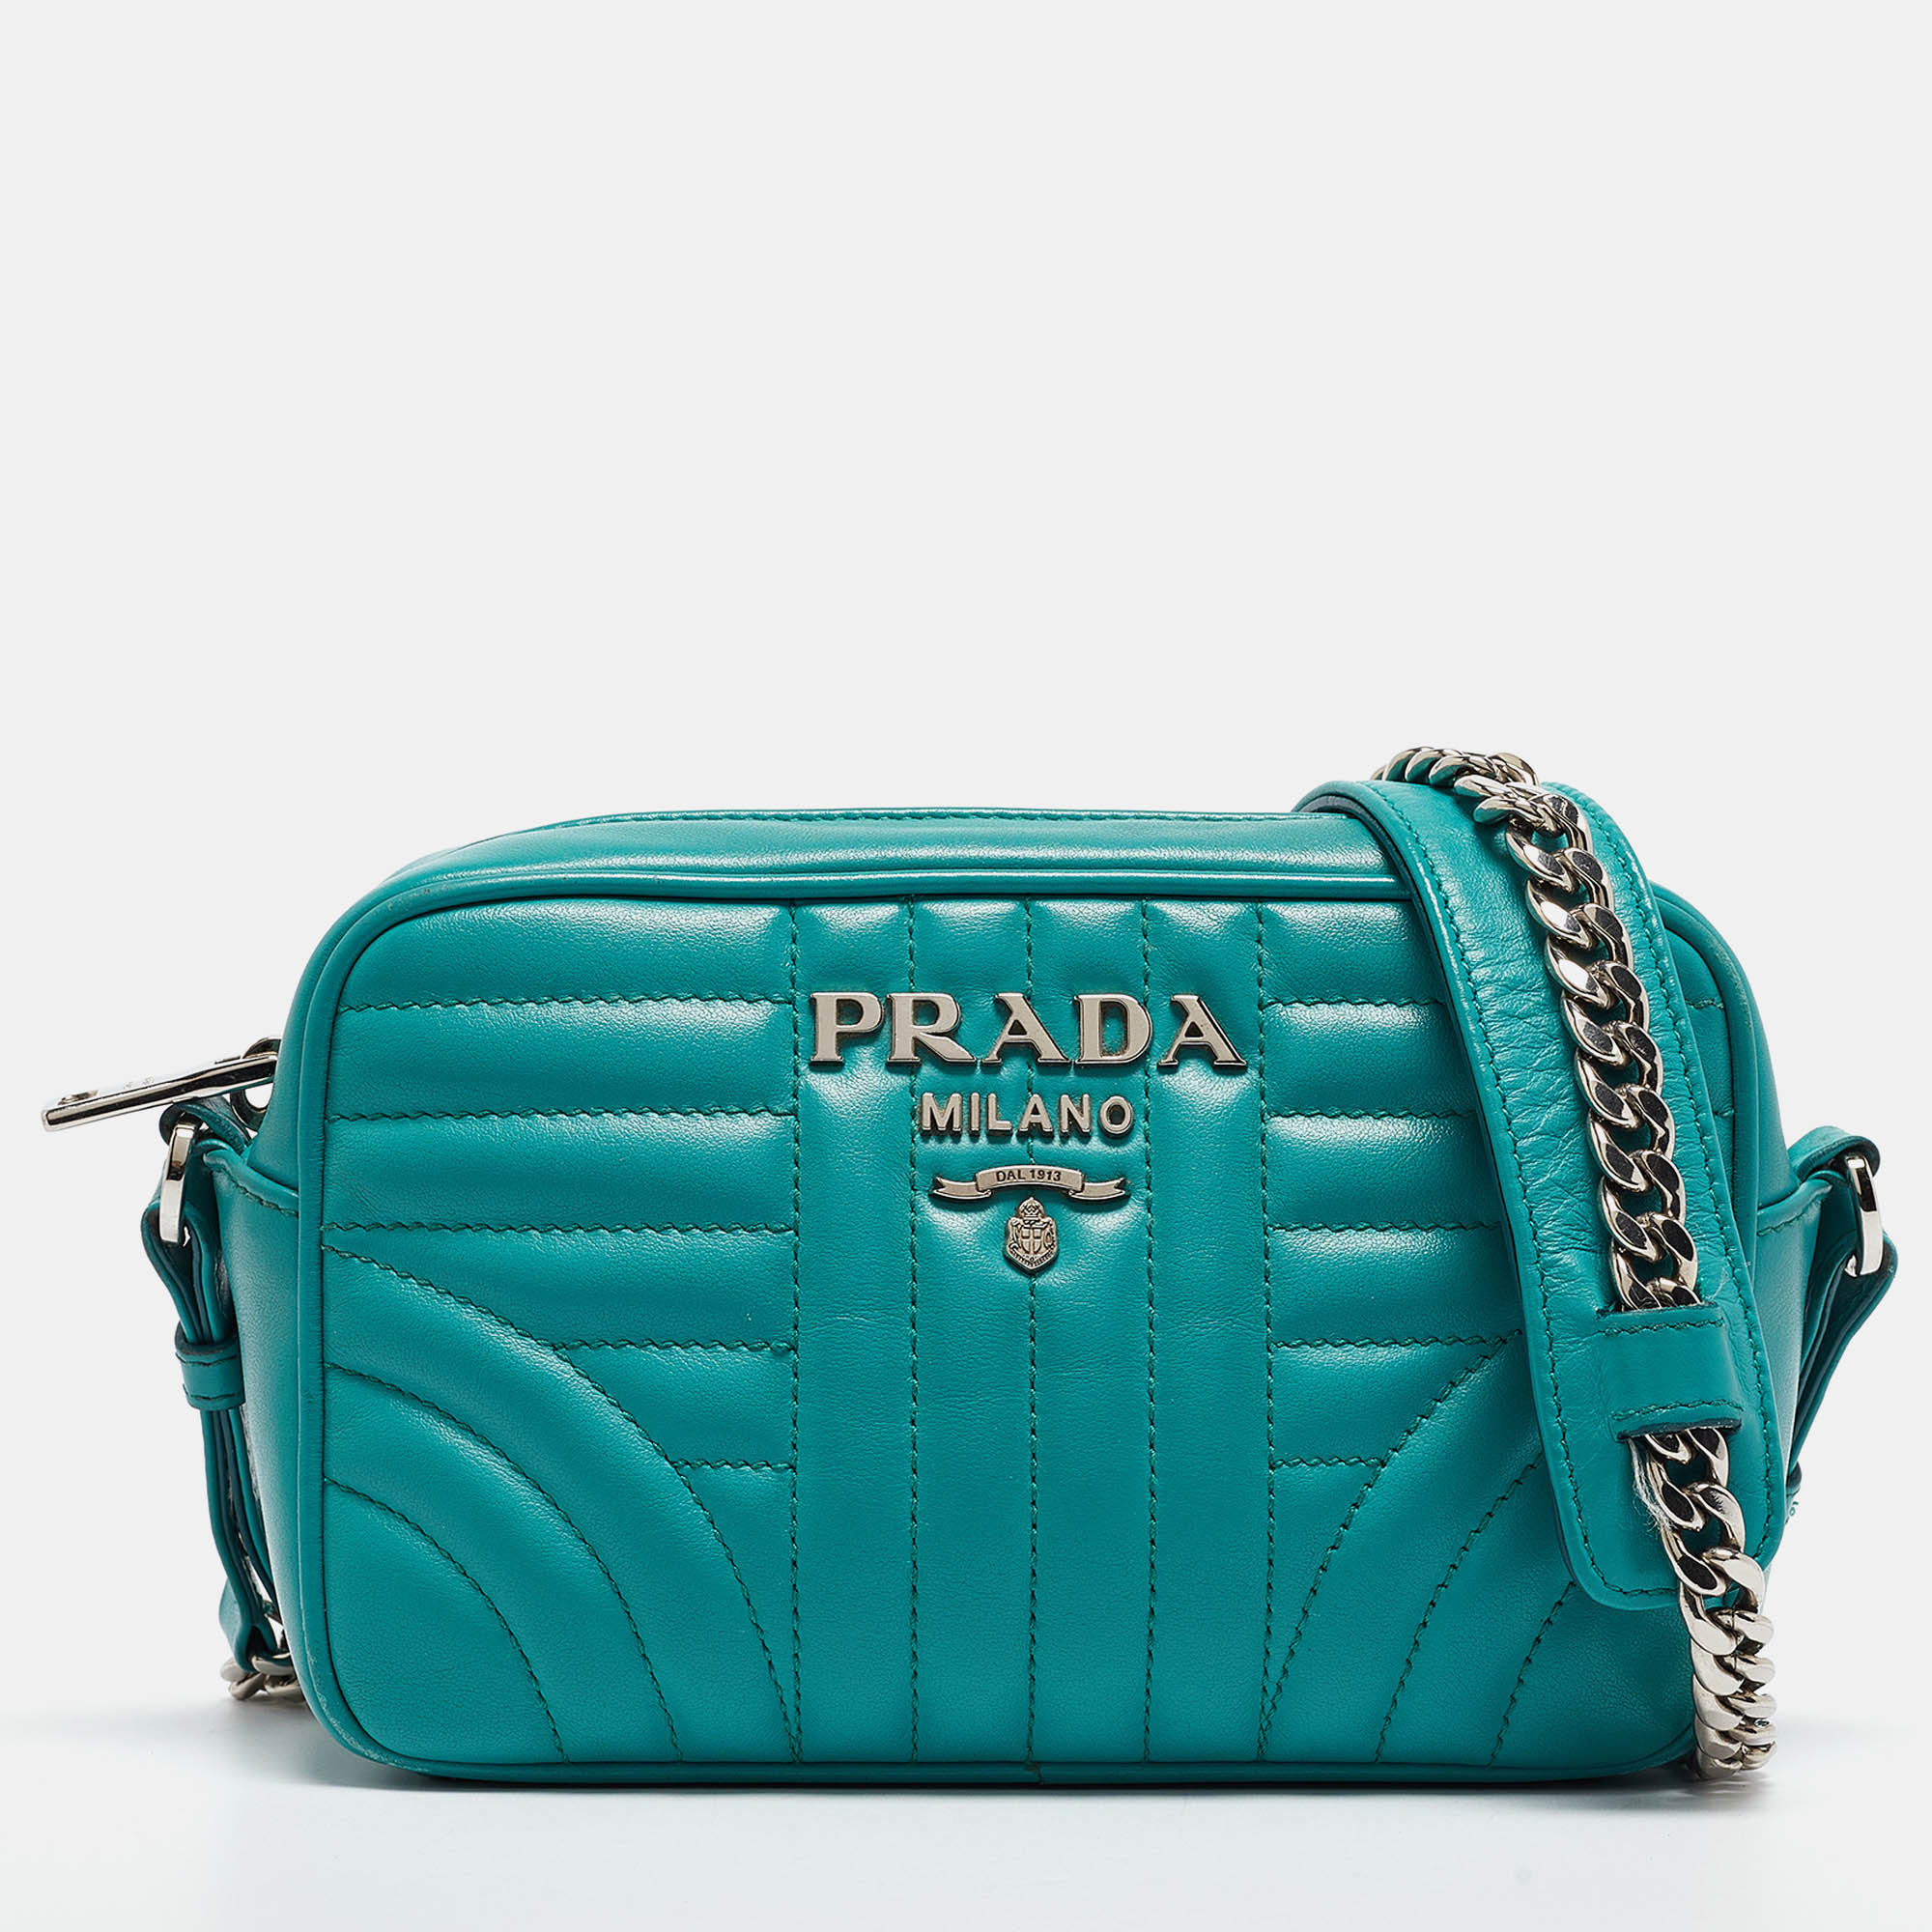 Ensure your days essentials are in order and your outfit is complete with this Prada green shoulder bag. Crafted using the best materials the bag carries the maisons signature of artful craftsmanship and enduring appeal.